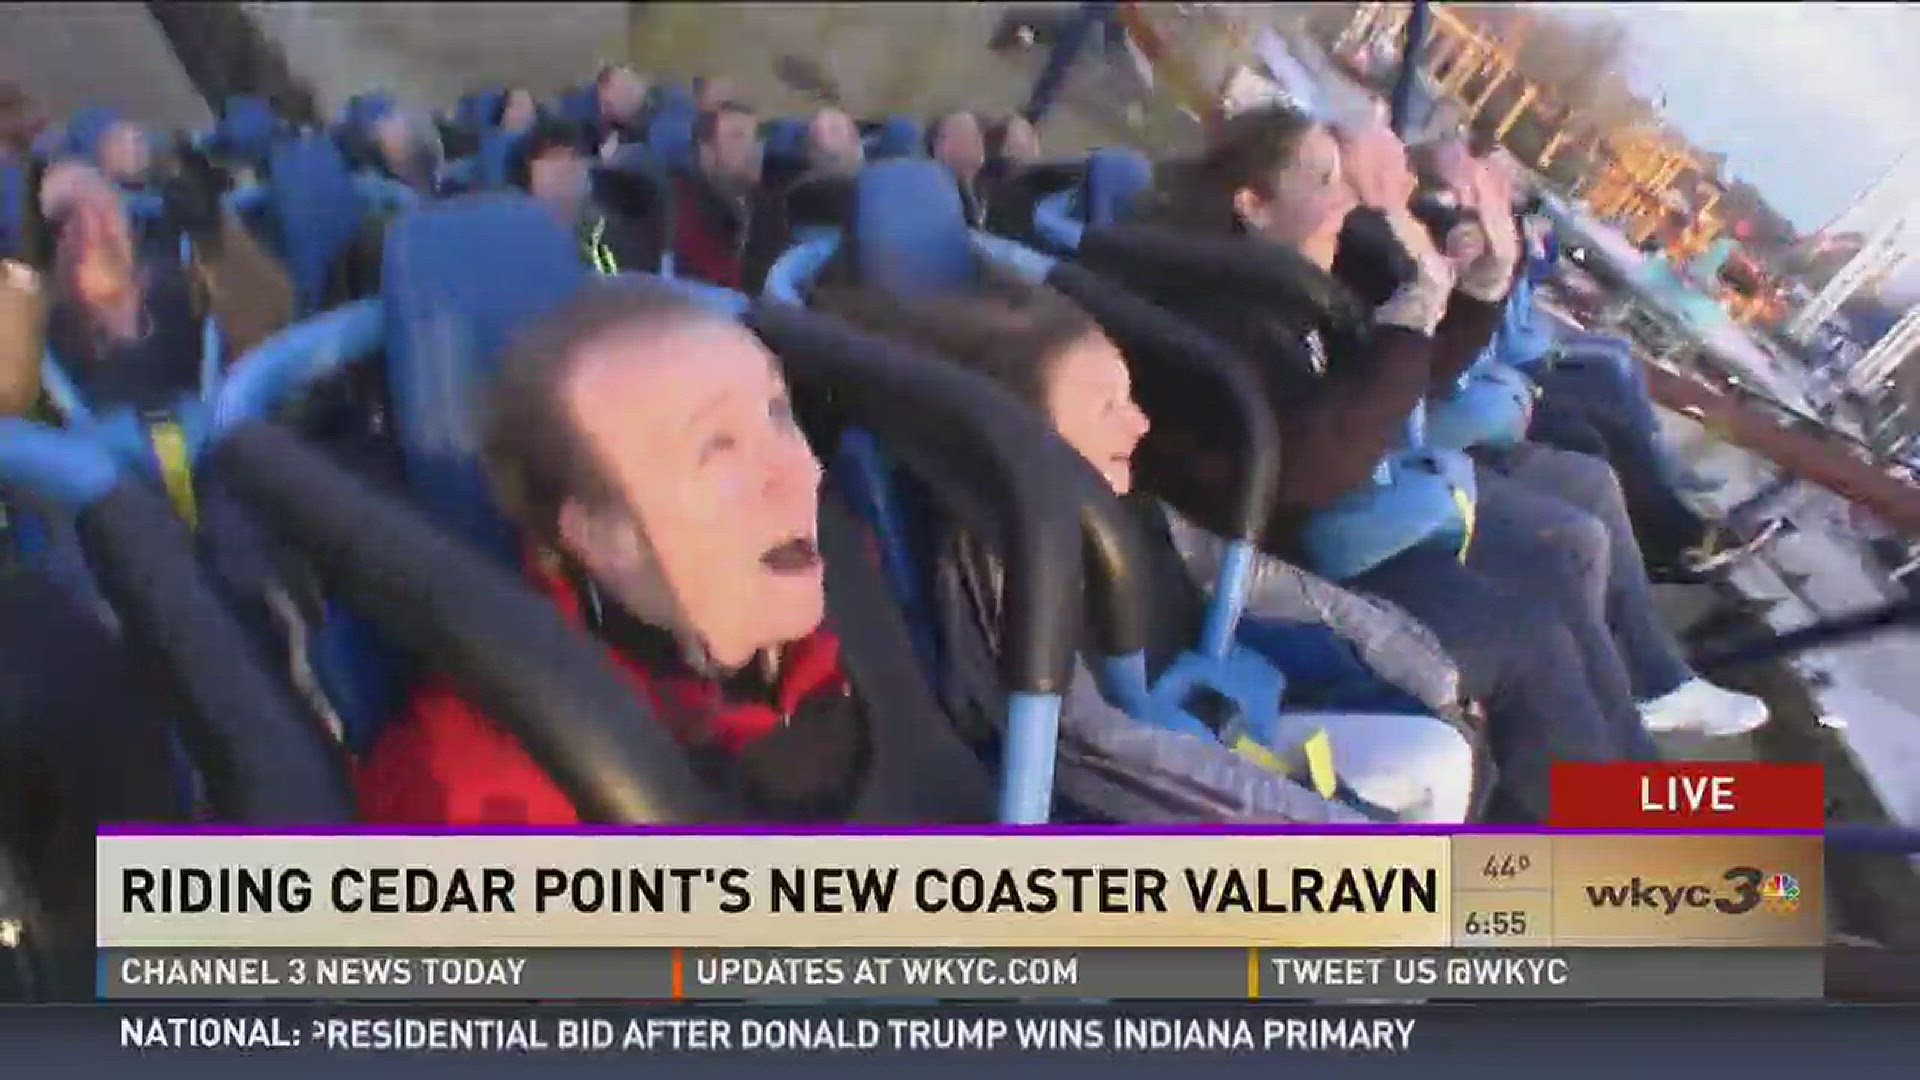 May 4, 2016: WKYC digital producer and coaster enthusiast, Ryan Haidet, was the first local reporter to ride Valravn on live TV at Cedar Point. Check it out!